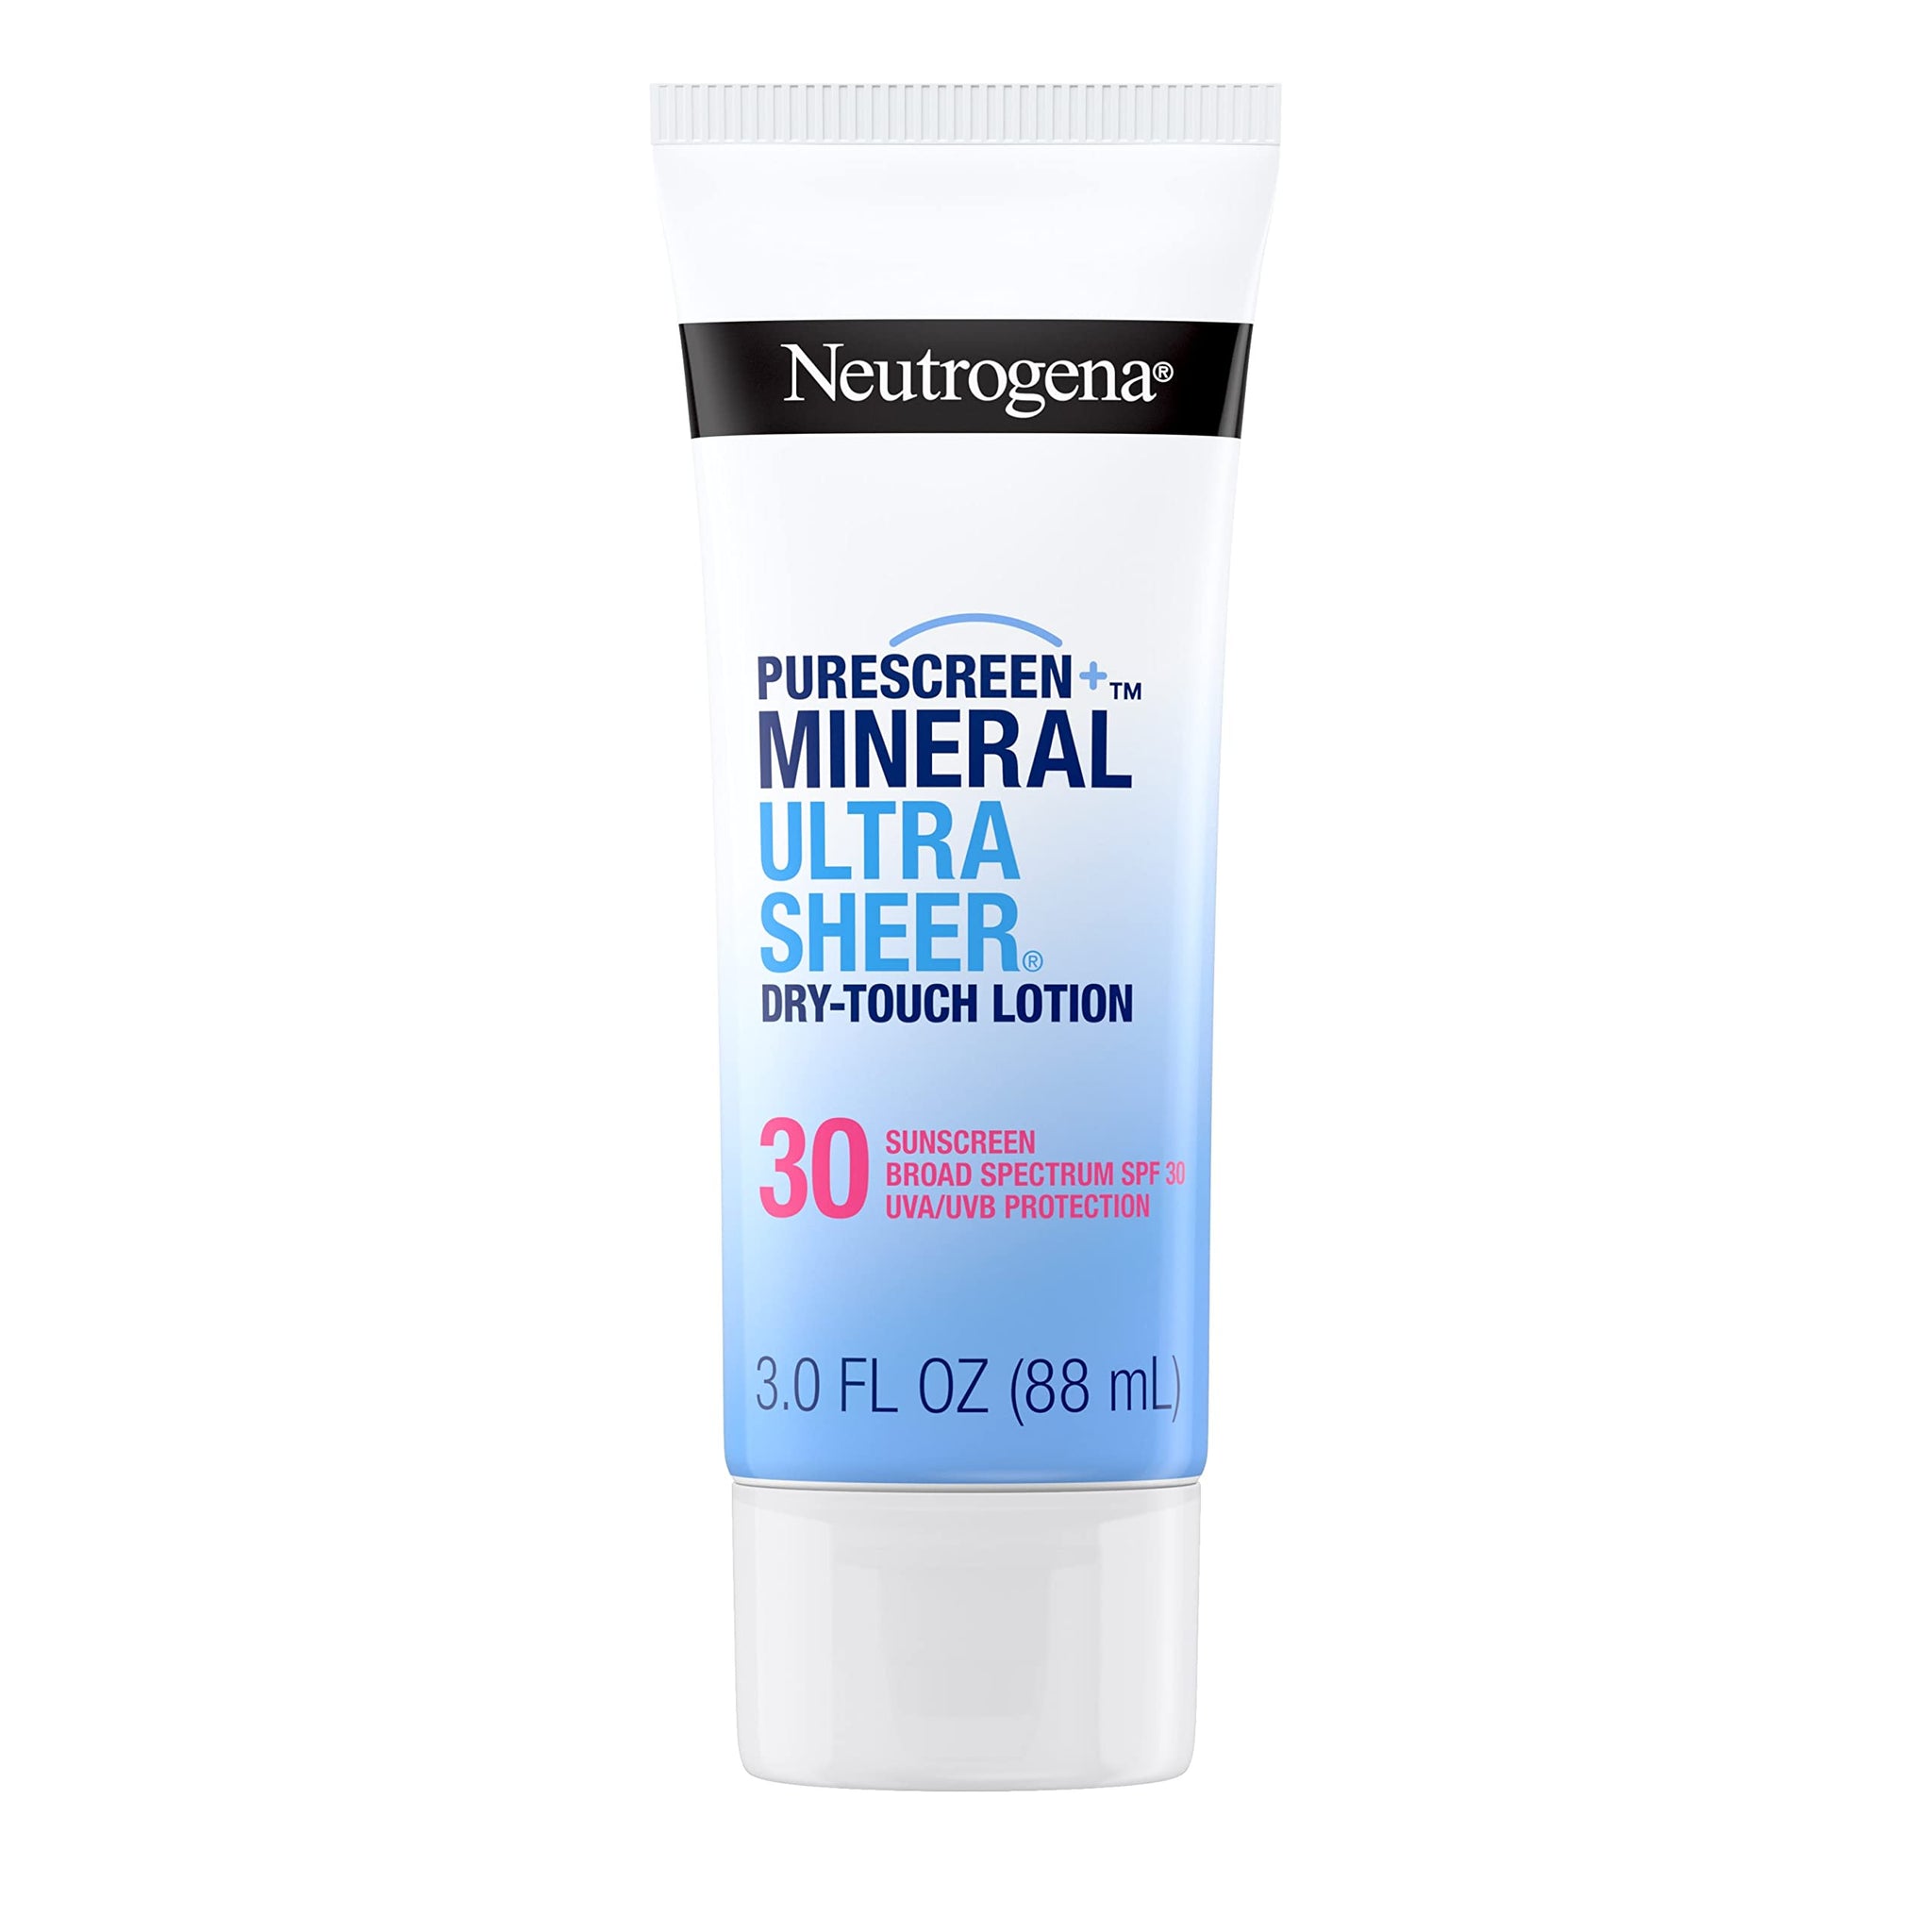 Neutrogena Mineral Ultra Sheer Dry-Touch SPF 30 Sunscreen Lotion